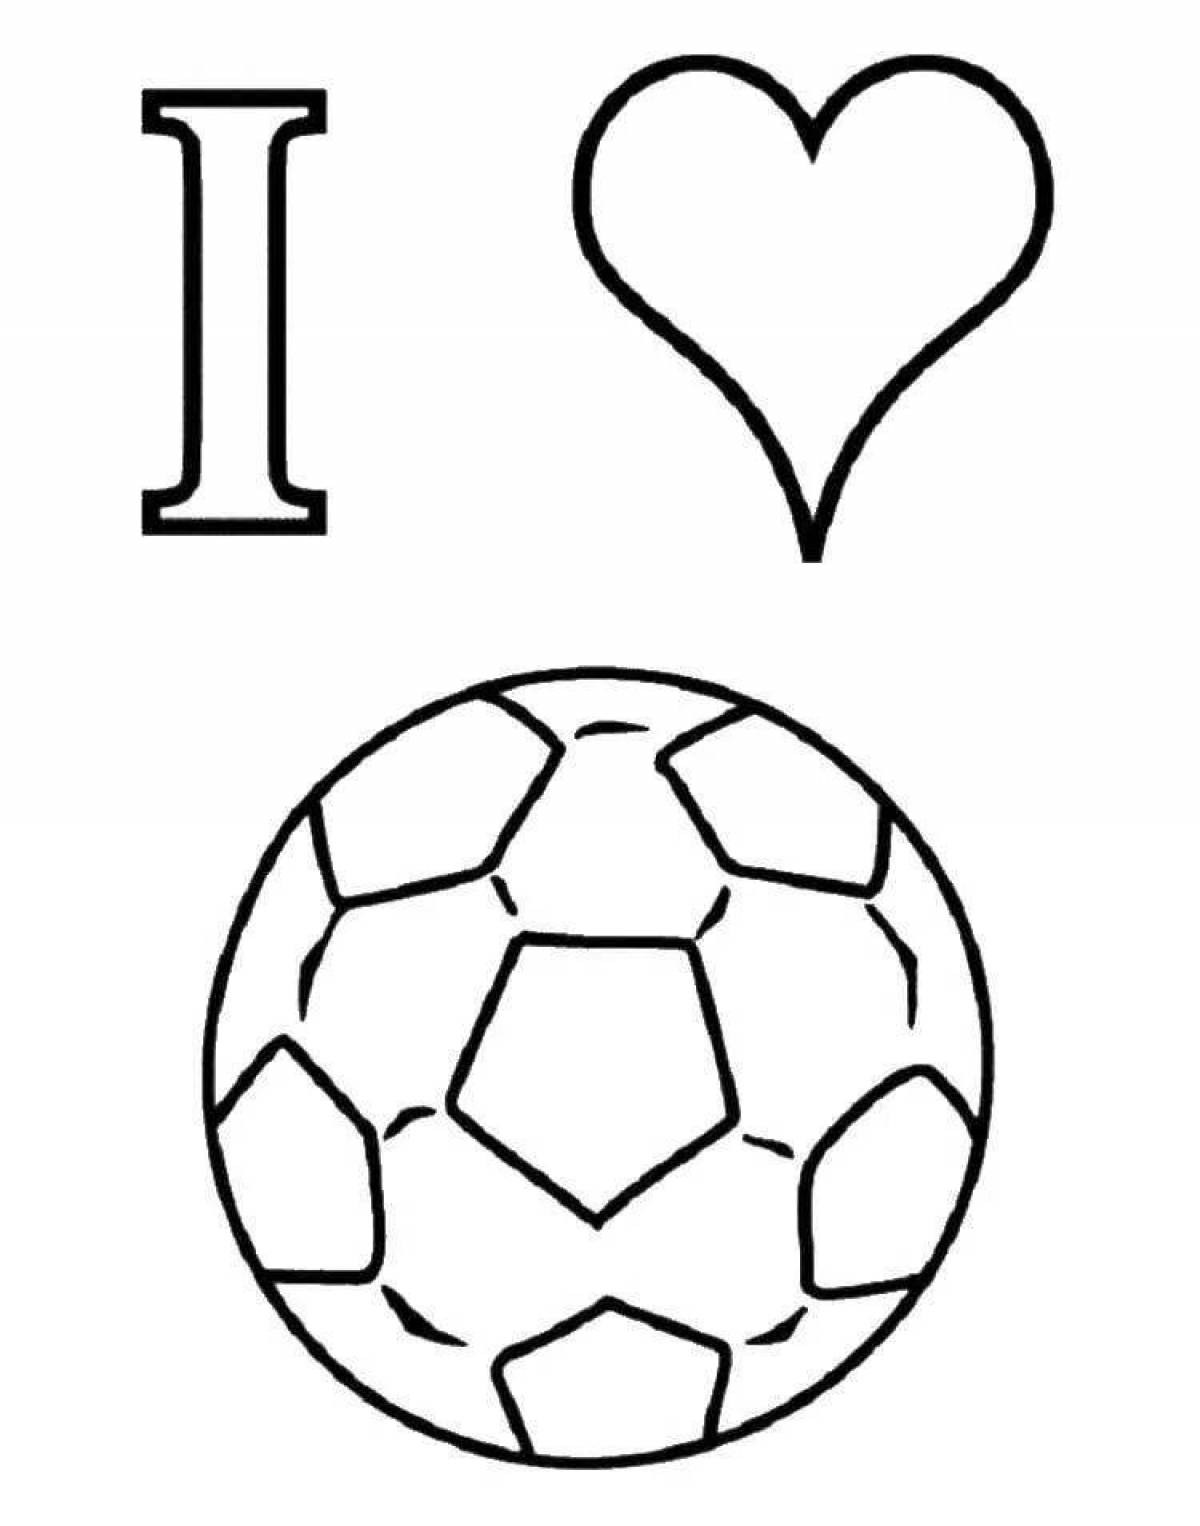 Great football coloring book for boys